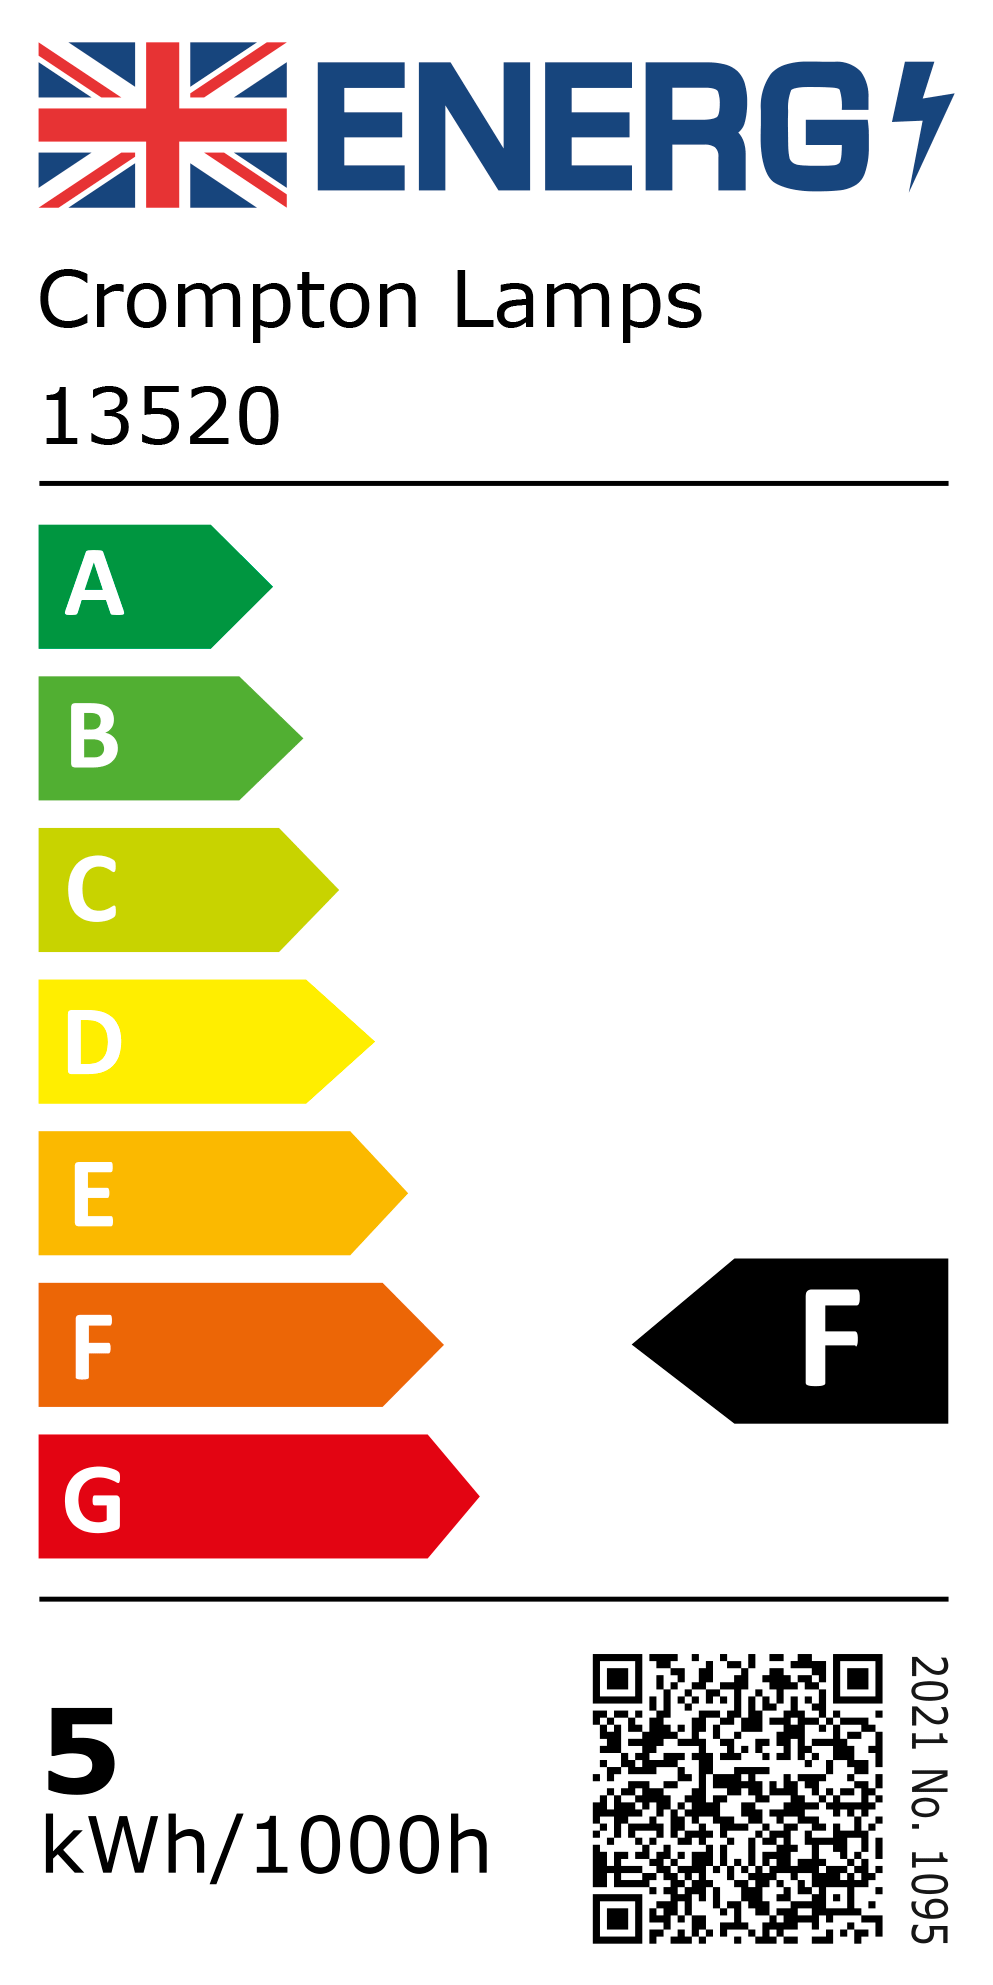 New 2021 Energy Rating Label: Stock Code 13520